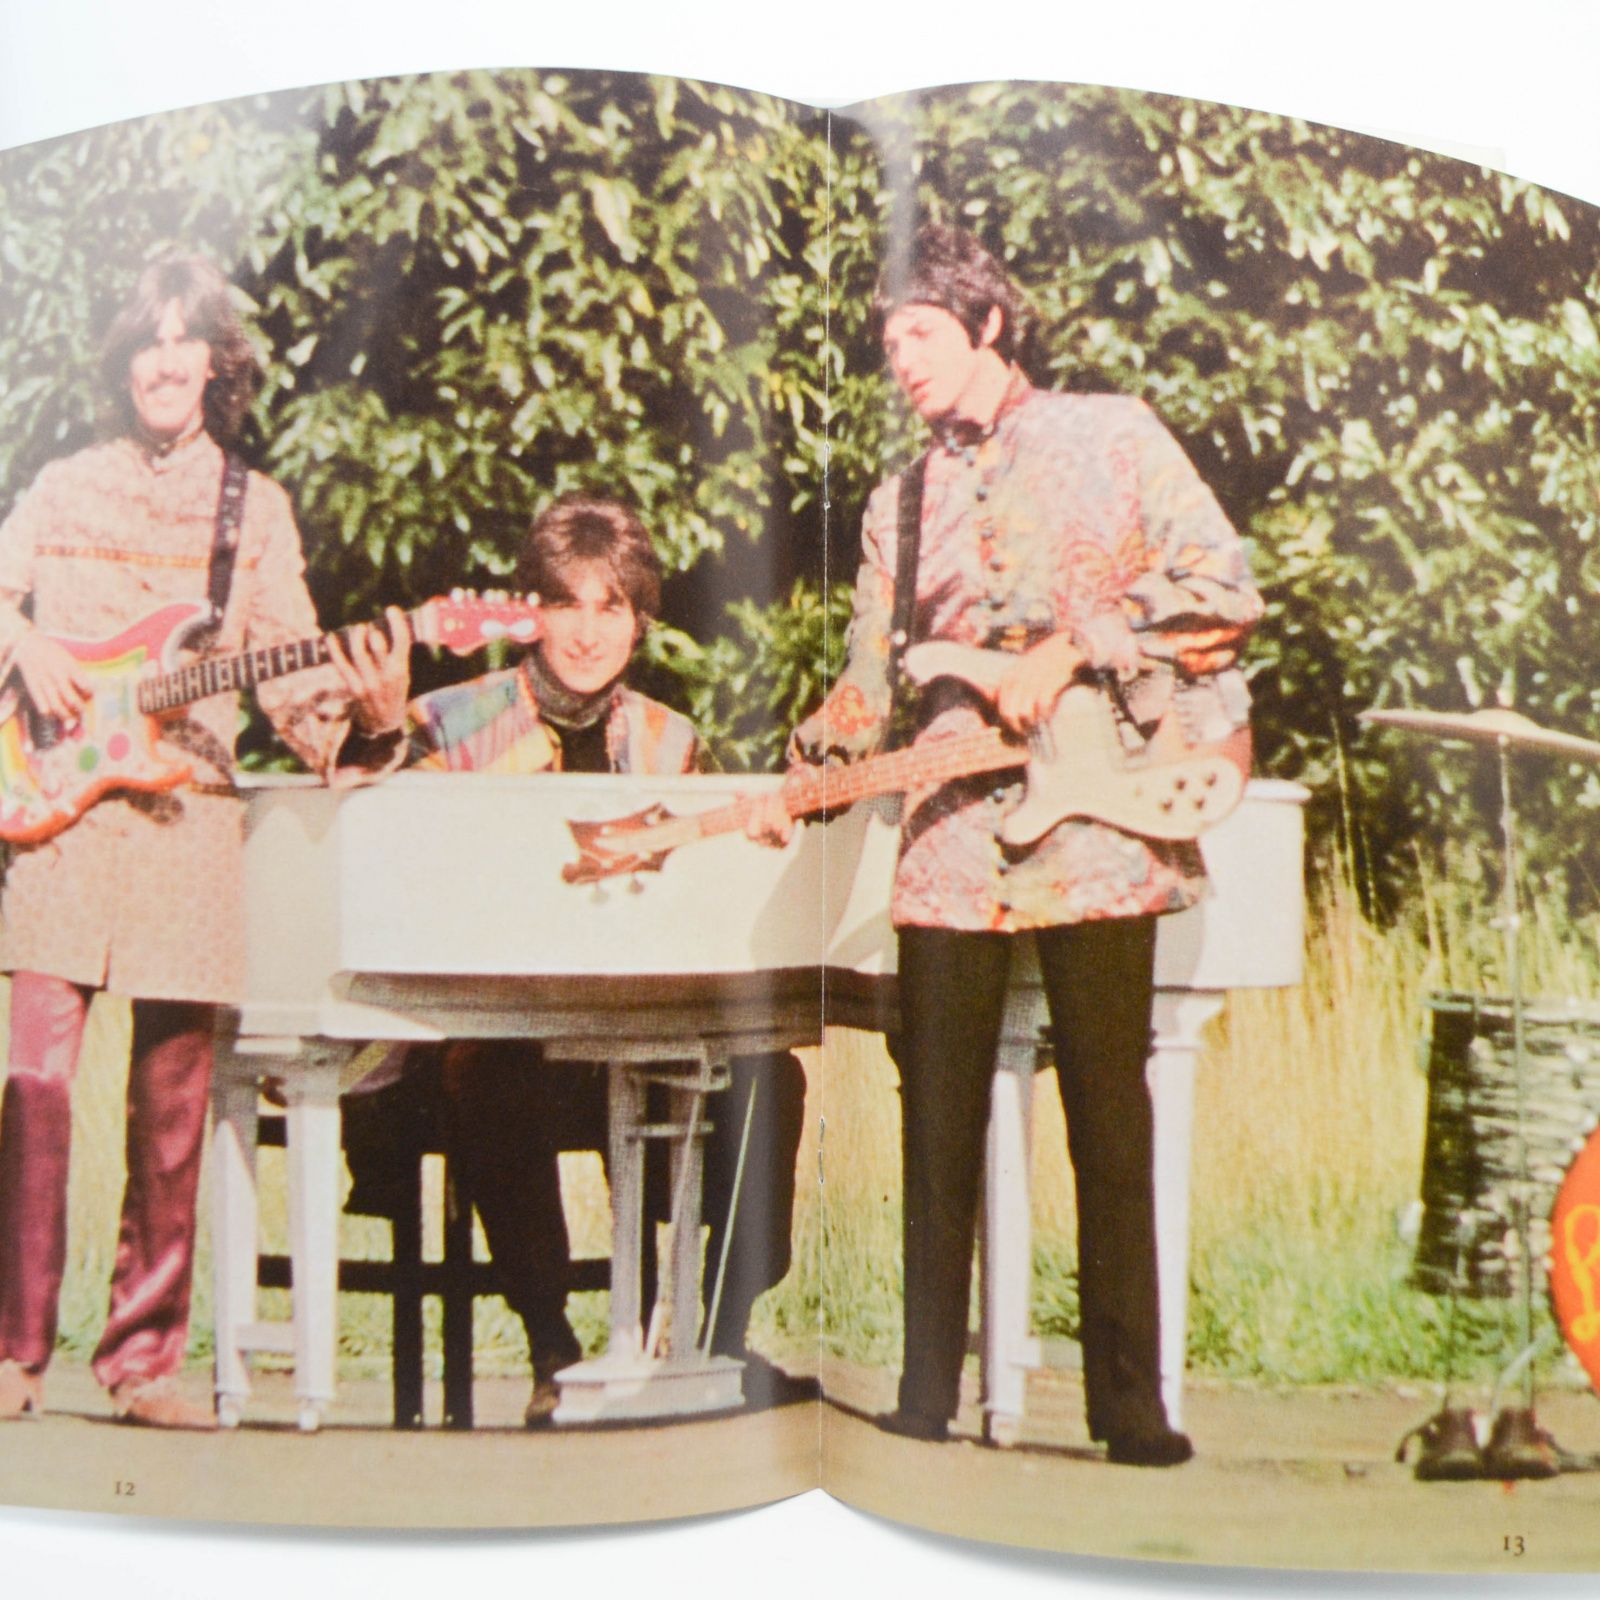 Beatles — Magical Mystery Tour (USA, booklet), 1967